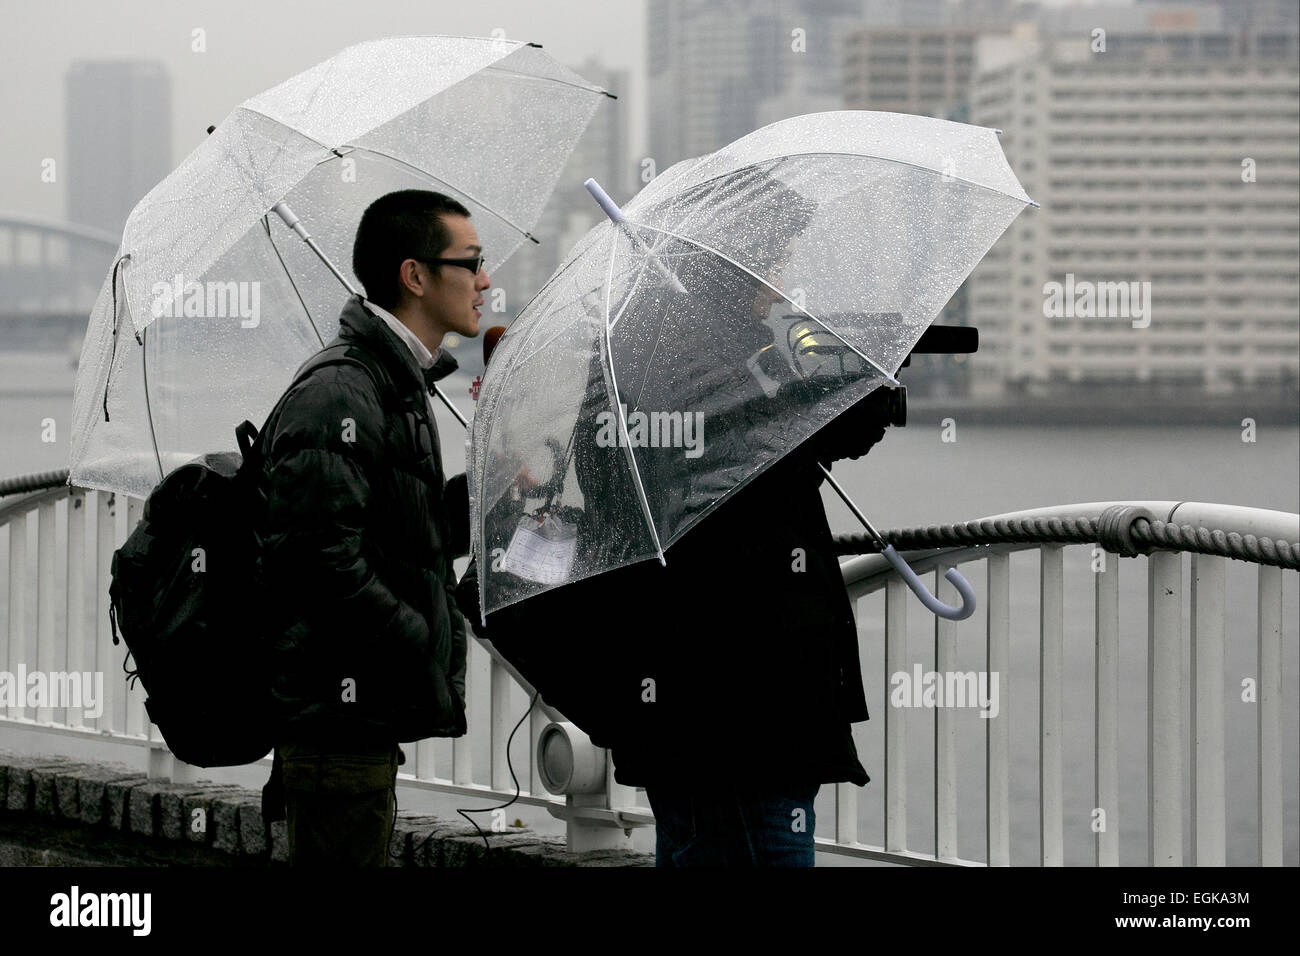 Tokyo, Japan. 26th February, 2015. Members of the media wait for the Duke of Cambridge to arrive in Tokyo by boat on February 26th, 2015. The Prince flew in to Tokyo International Airport on Thursday afternoon and then traveled to Tokyo city on a cruise boat to visit the historic Hama Rikyu gardens and a traditional Japanese tea house. He arrived on a rainy day but nevertheless Japanese TV crews were out to try to catch a glimpse of the Prince as his boat entered Tokyo Harbour and passed under the Rainbow Bridge. Credit:  Aflo Co. Ltd./Alamy Live News Stock Photo